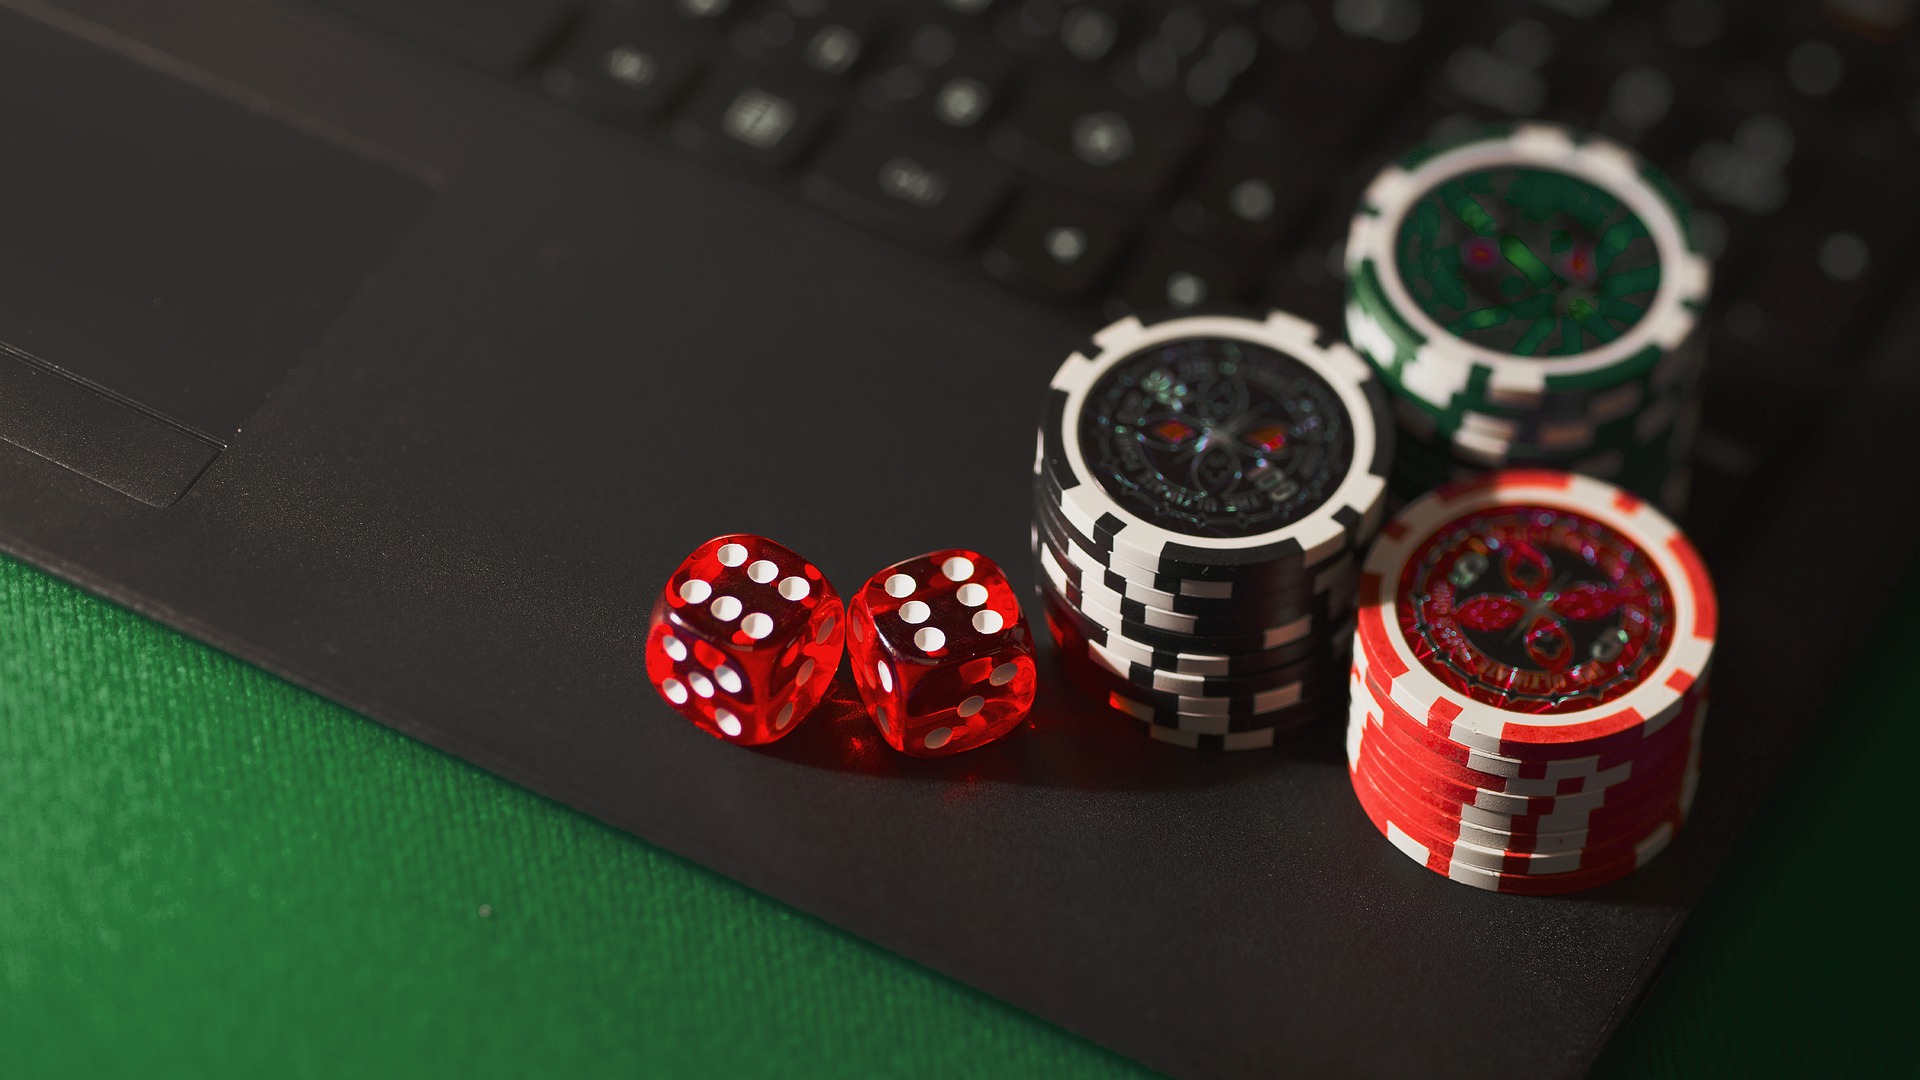 Situs poker may or may not be genuine! Know more post thumbnail image